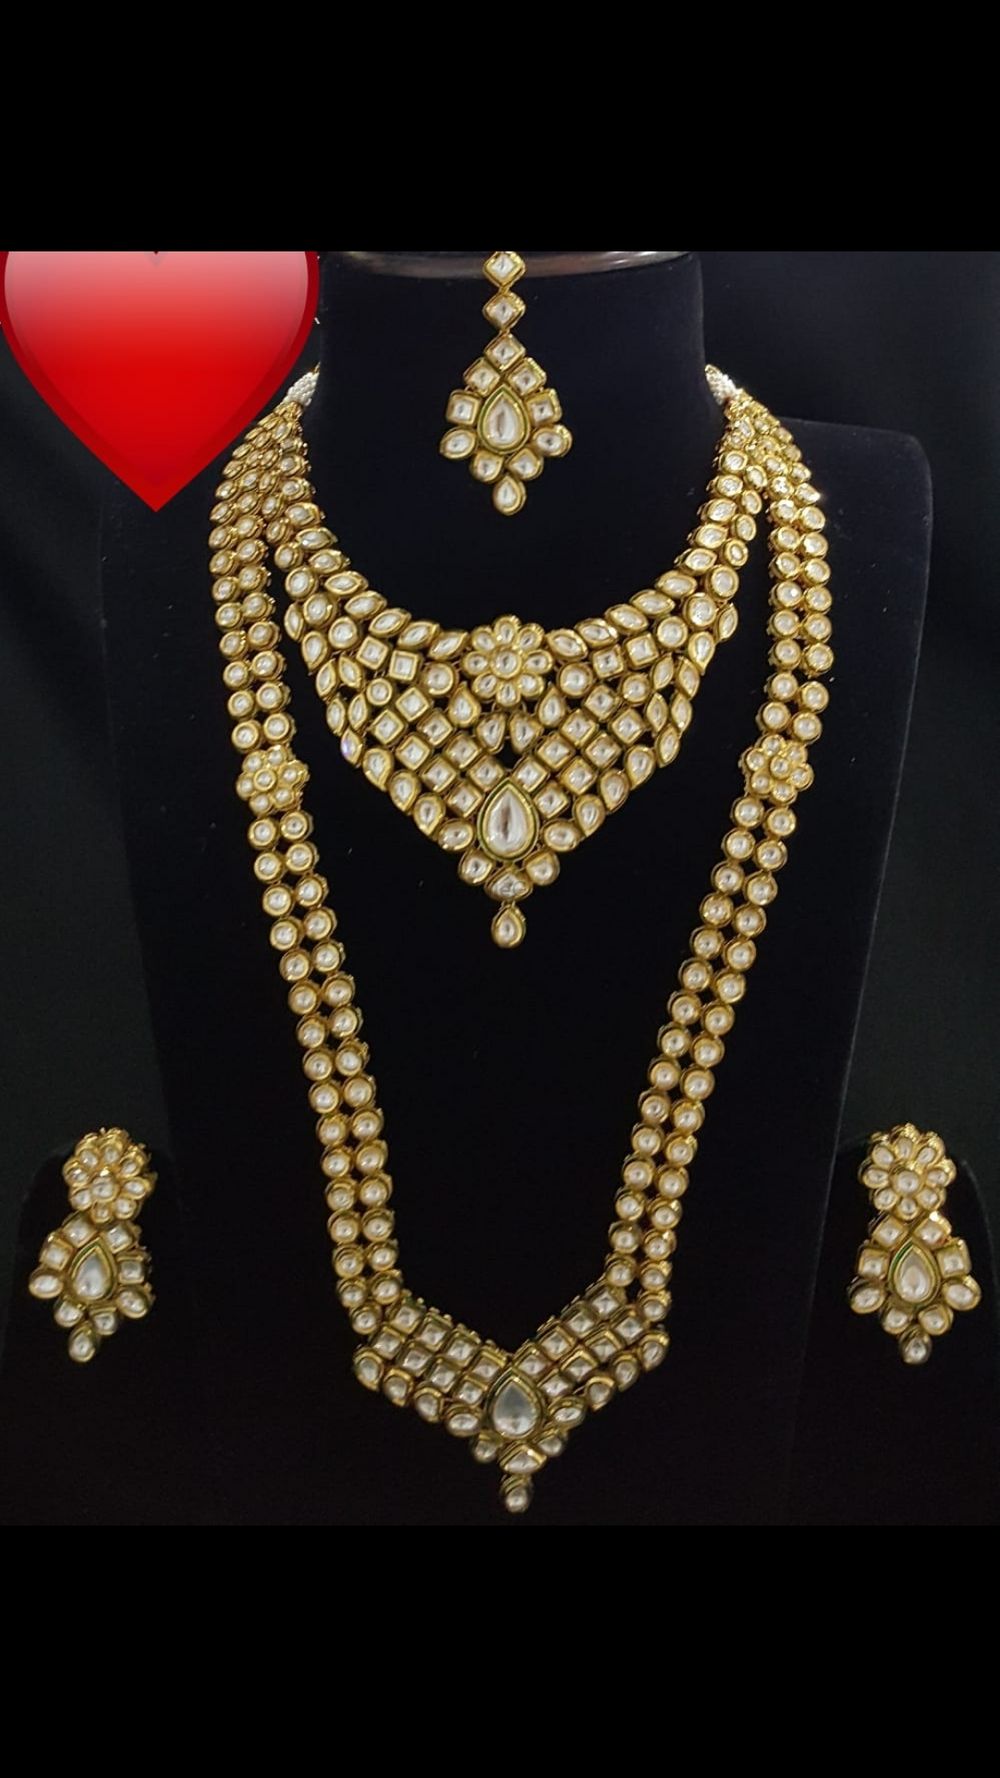 Photo From Vinjari Bridal Collections - By Vinjari Jewels and Pearls